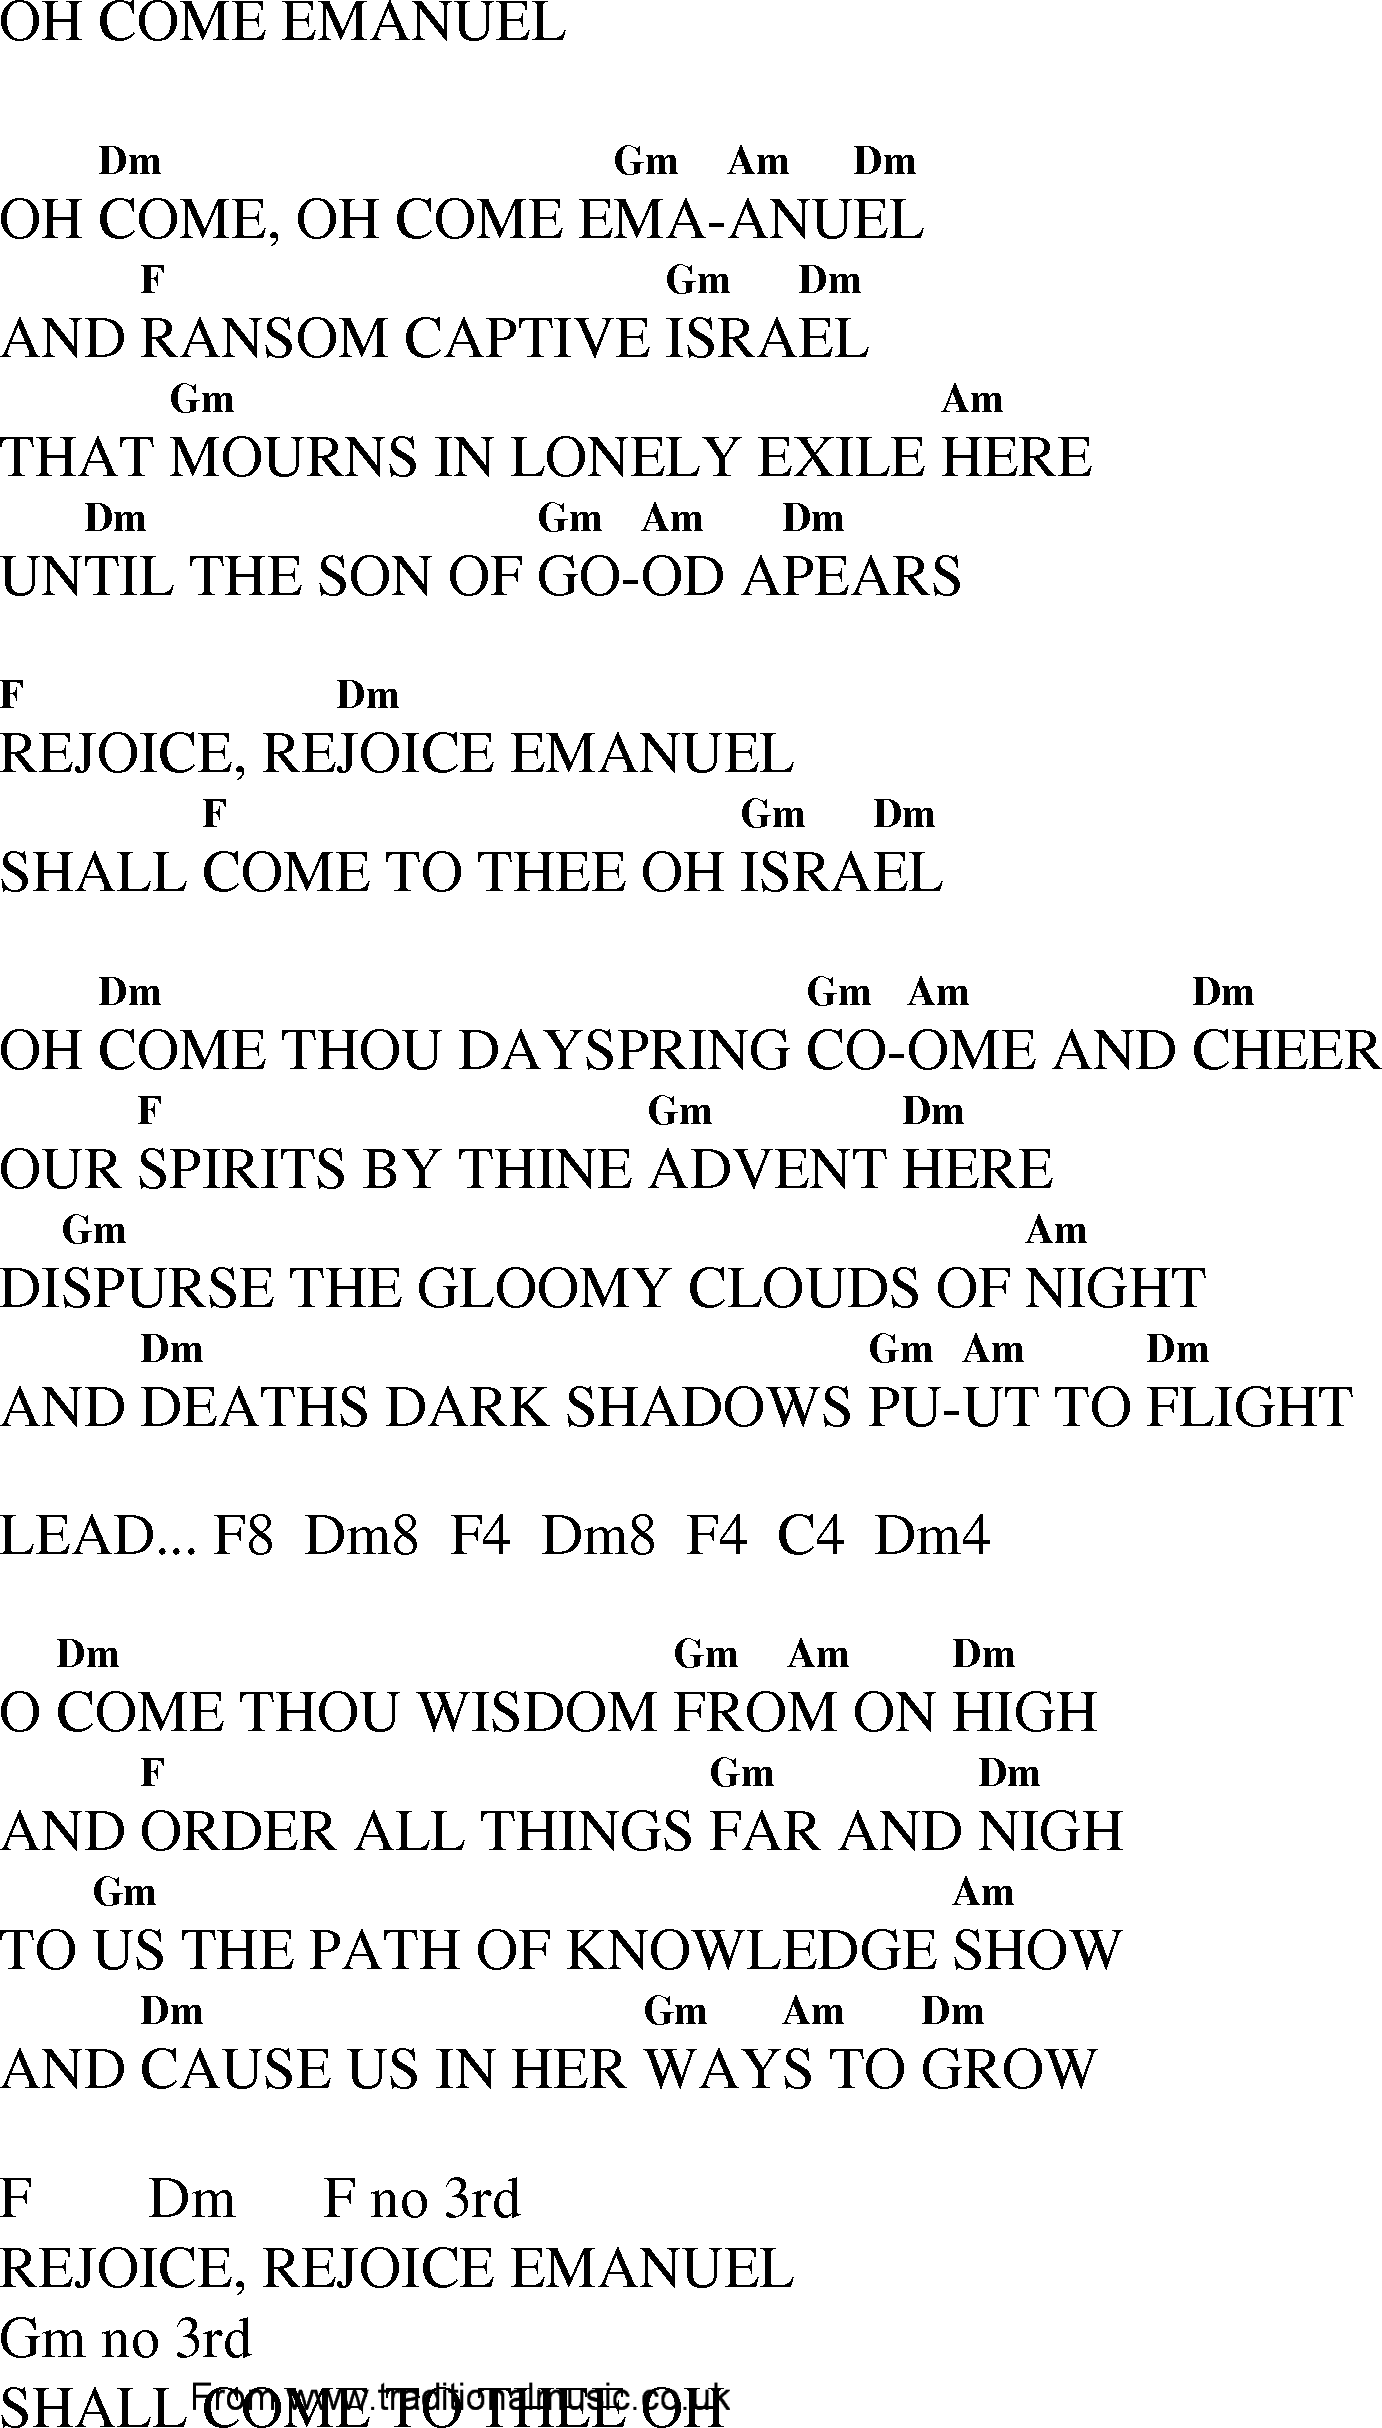 Gospel Song: oh_come_emanuel, lyrics and chords.